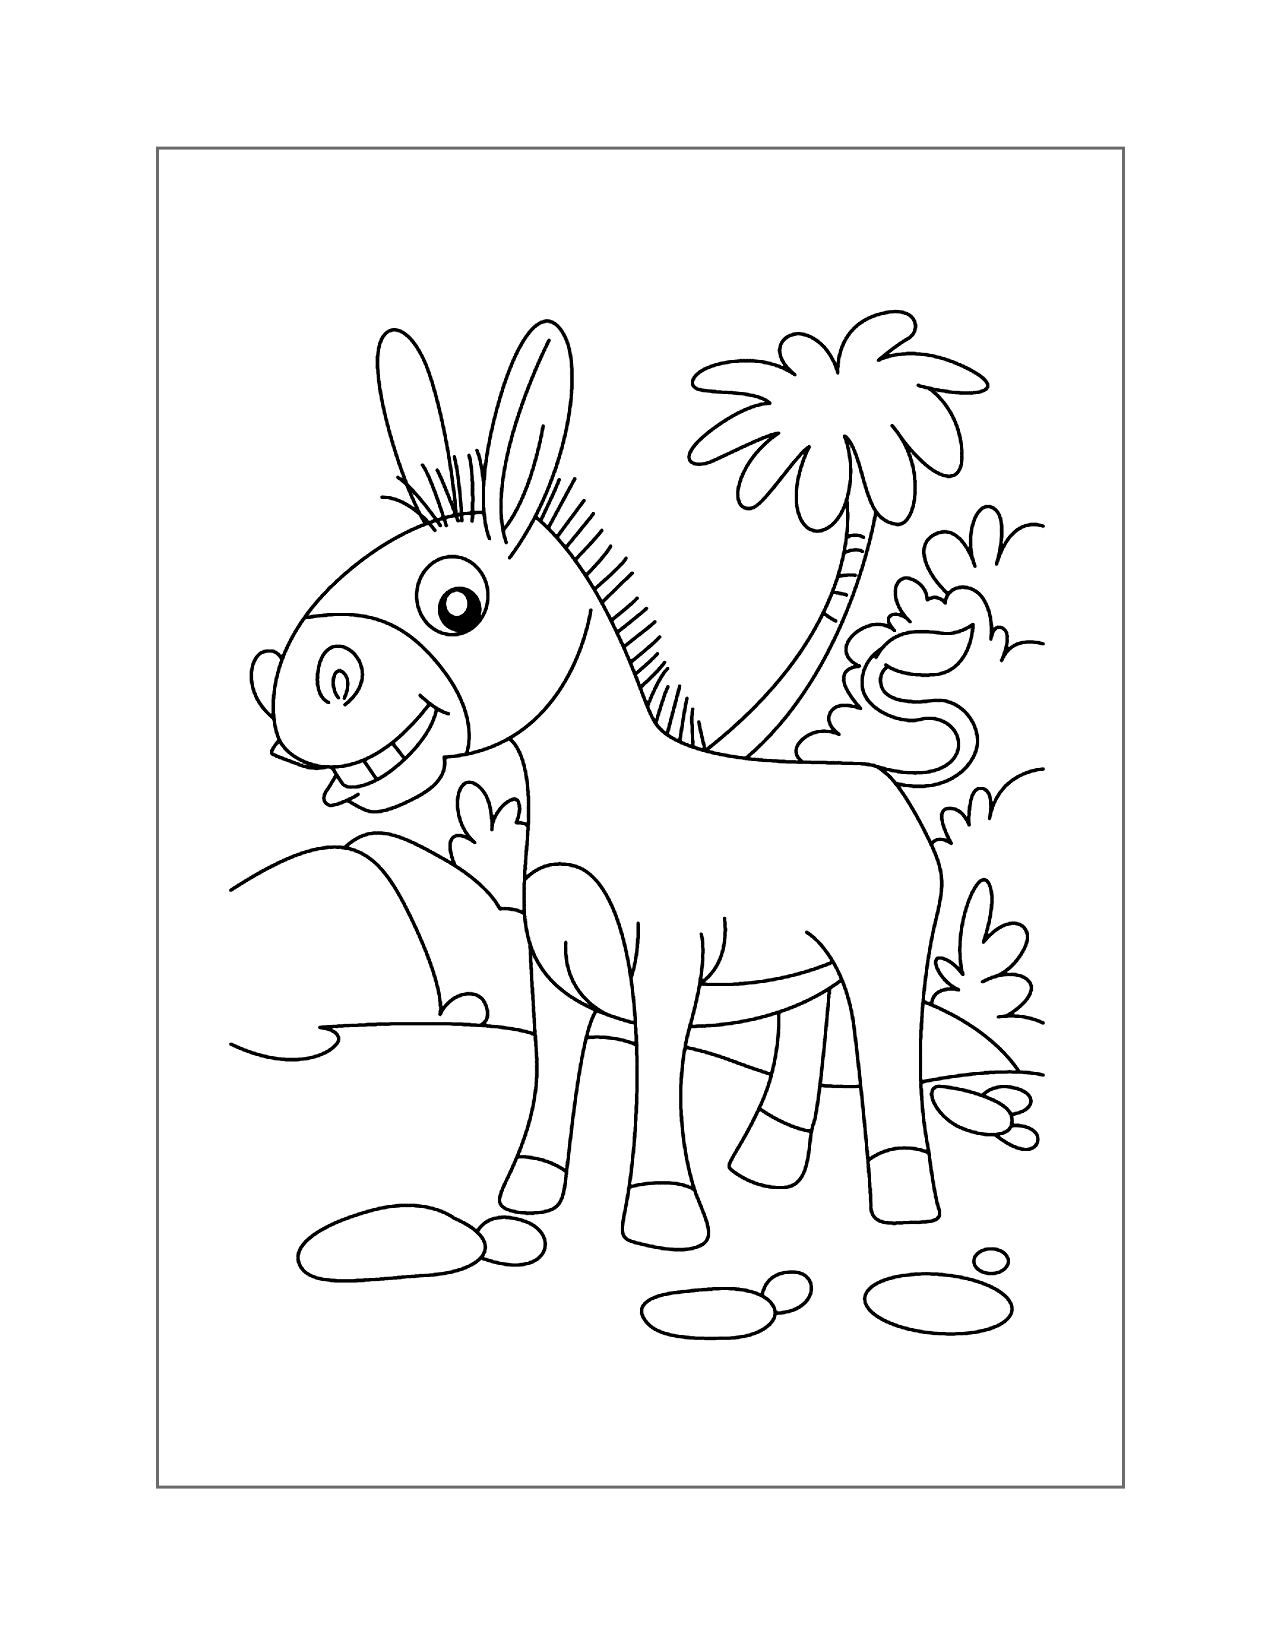 Cute Baby Donkey Cartoon Coloring Page